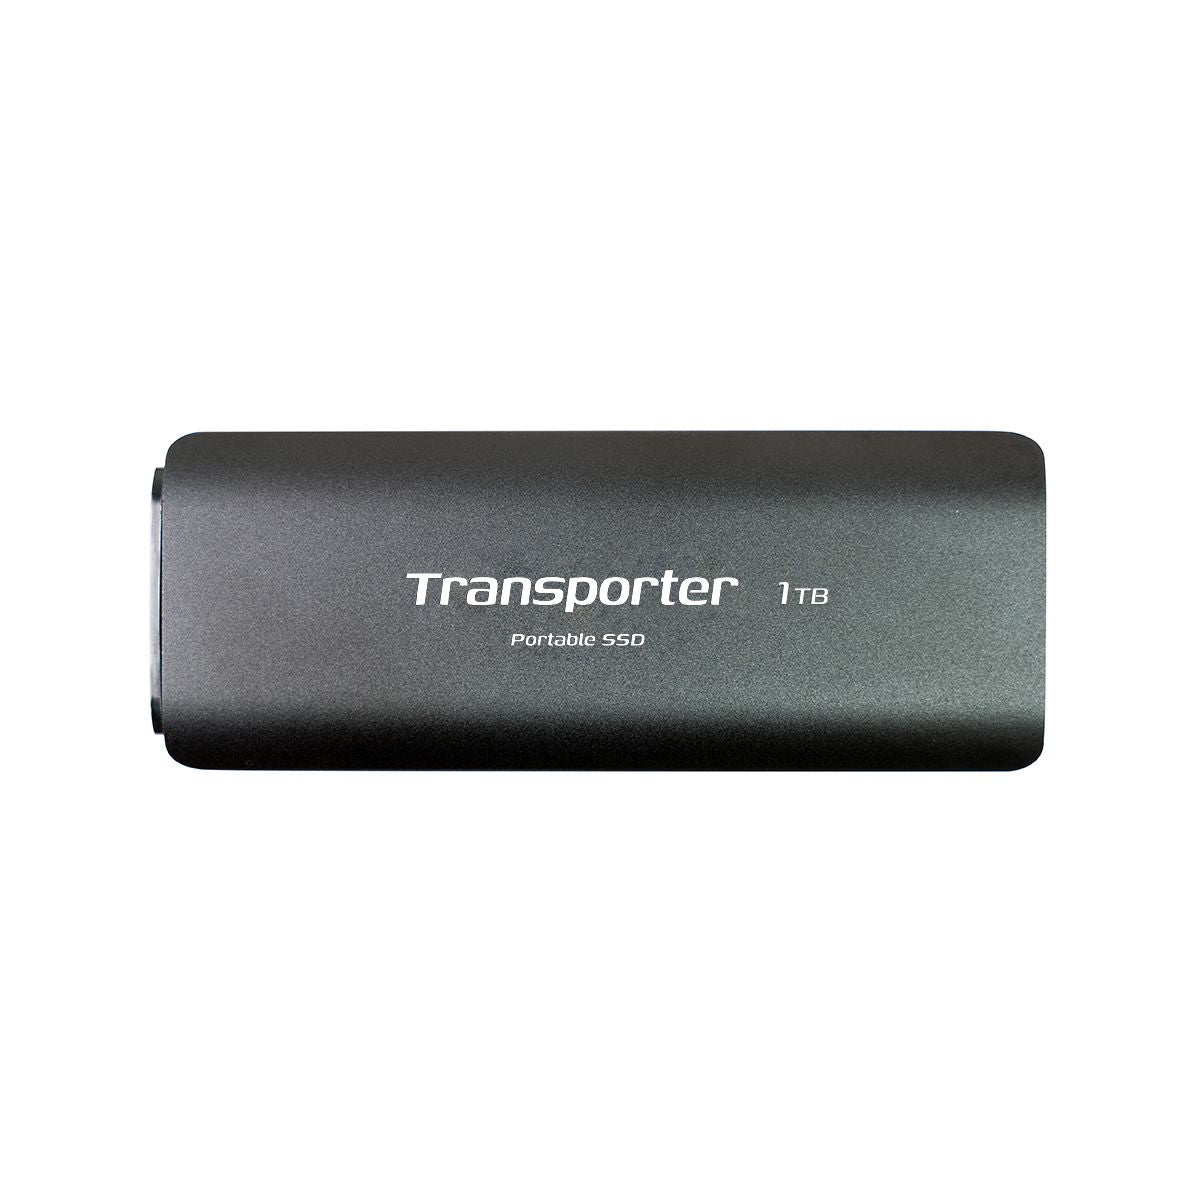 **NEW** Patriot Transporter Portable Series - USB 3.2 Gen. 2 Type-C External Solid State Drive